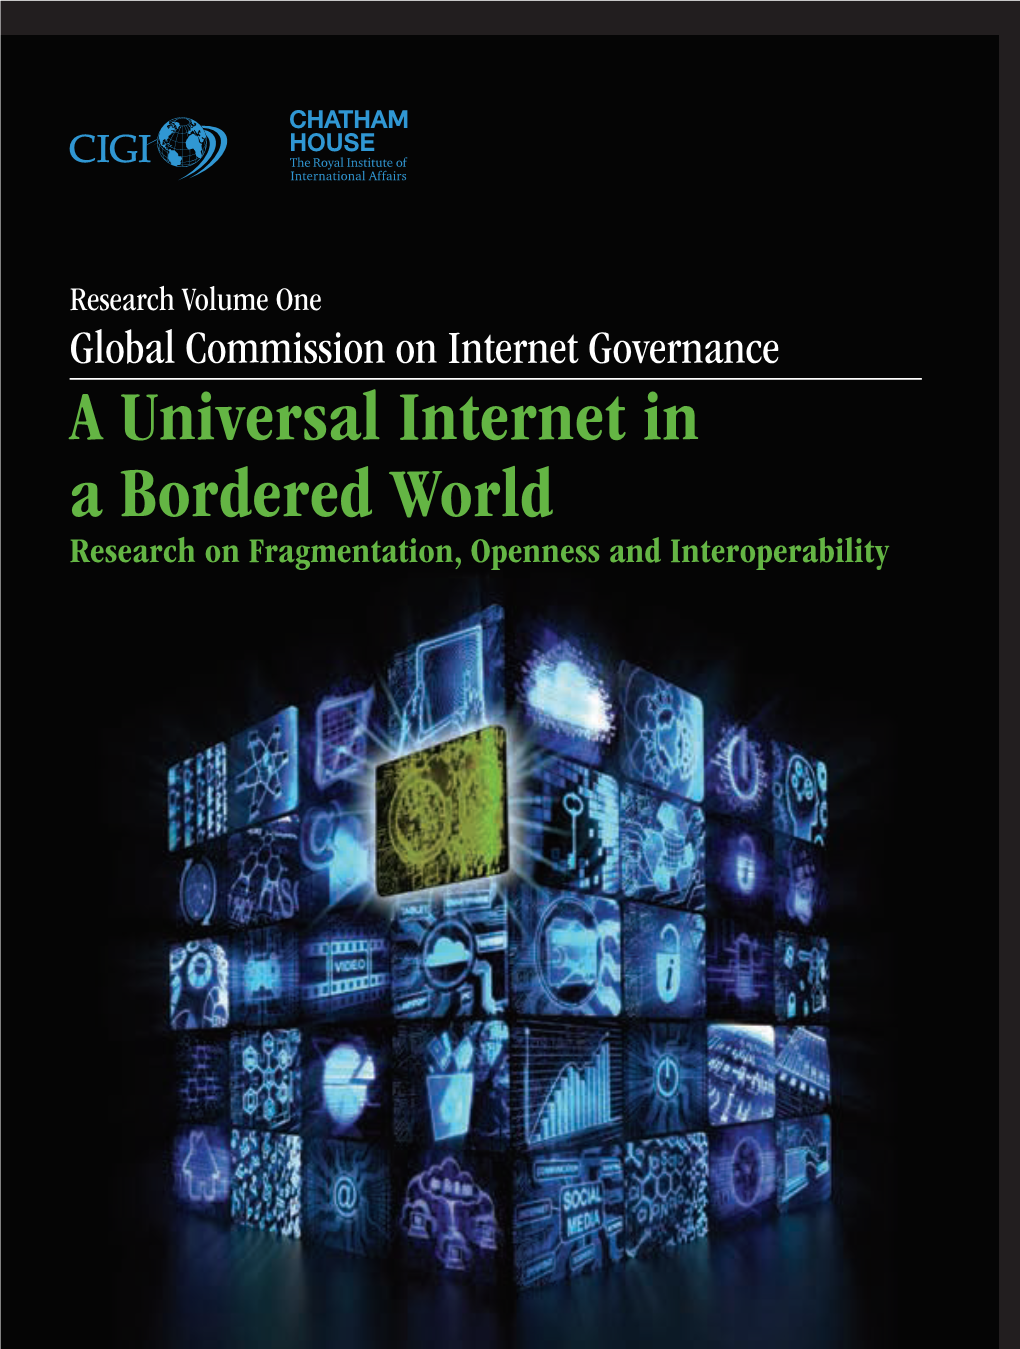 A Universal Internet in a Bordered World: Research on Fragmentation, Openness and Interoperability